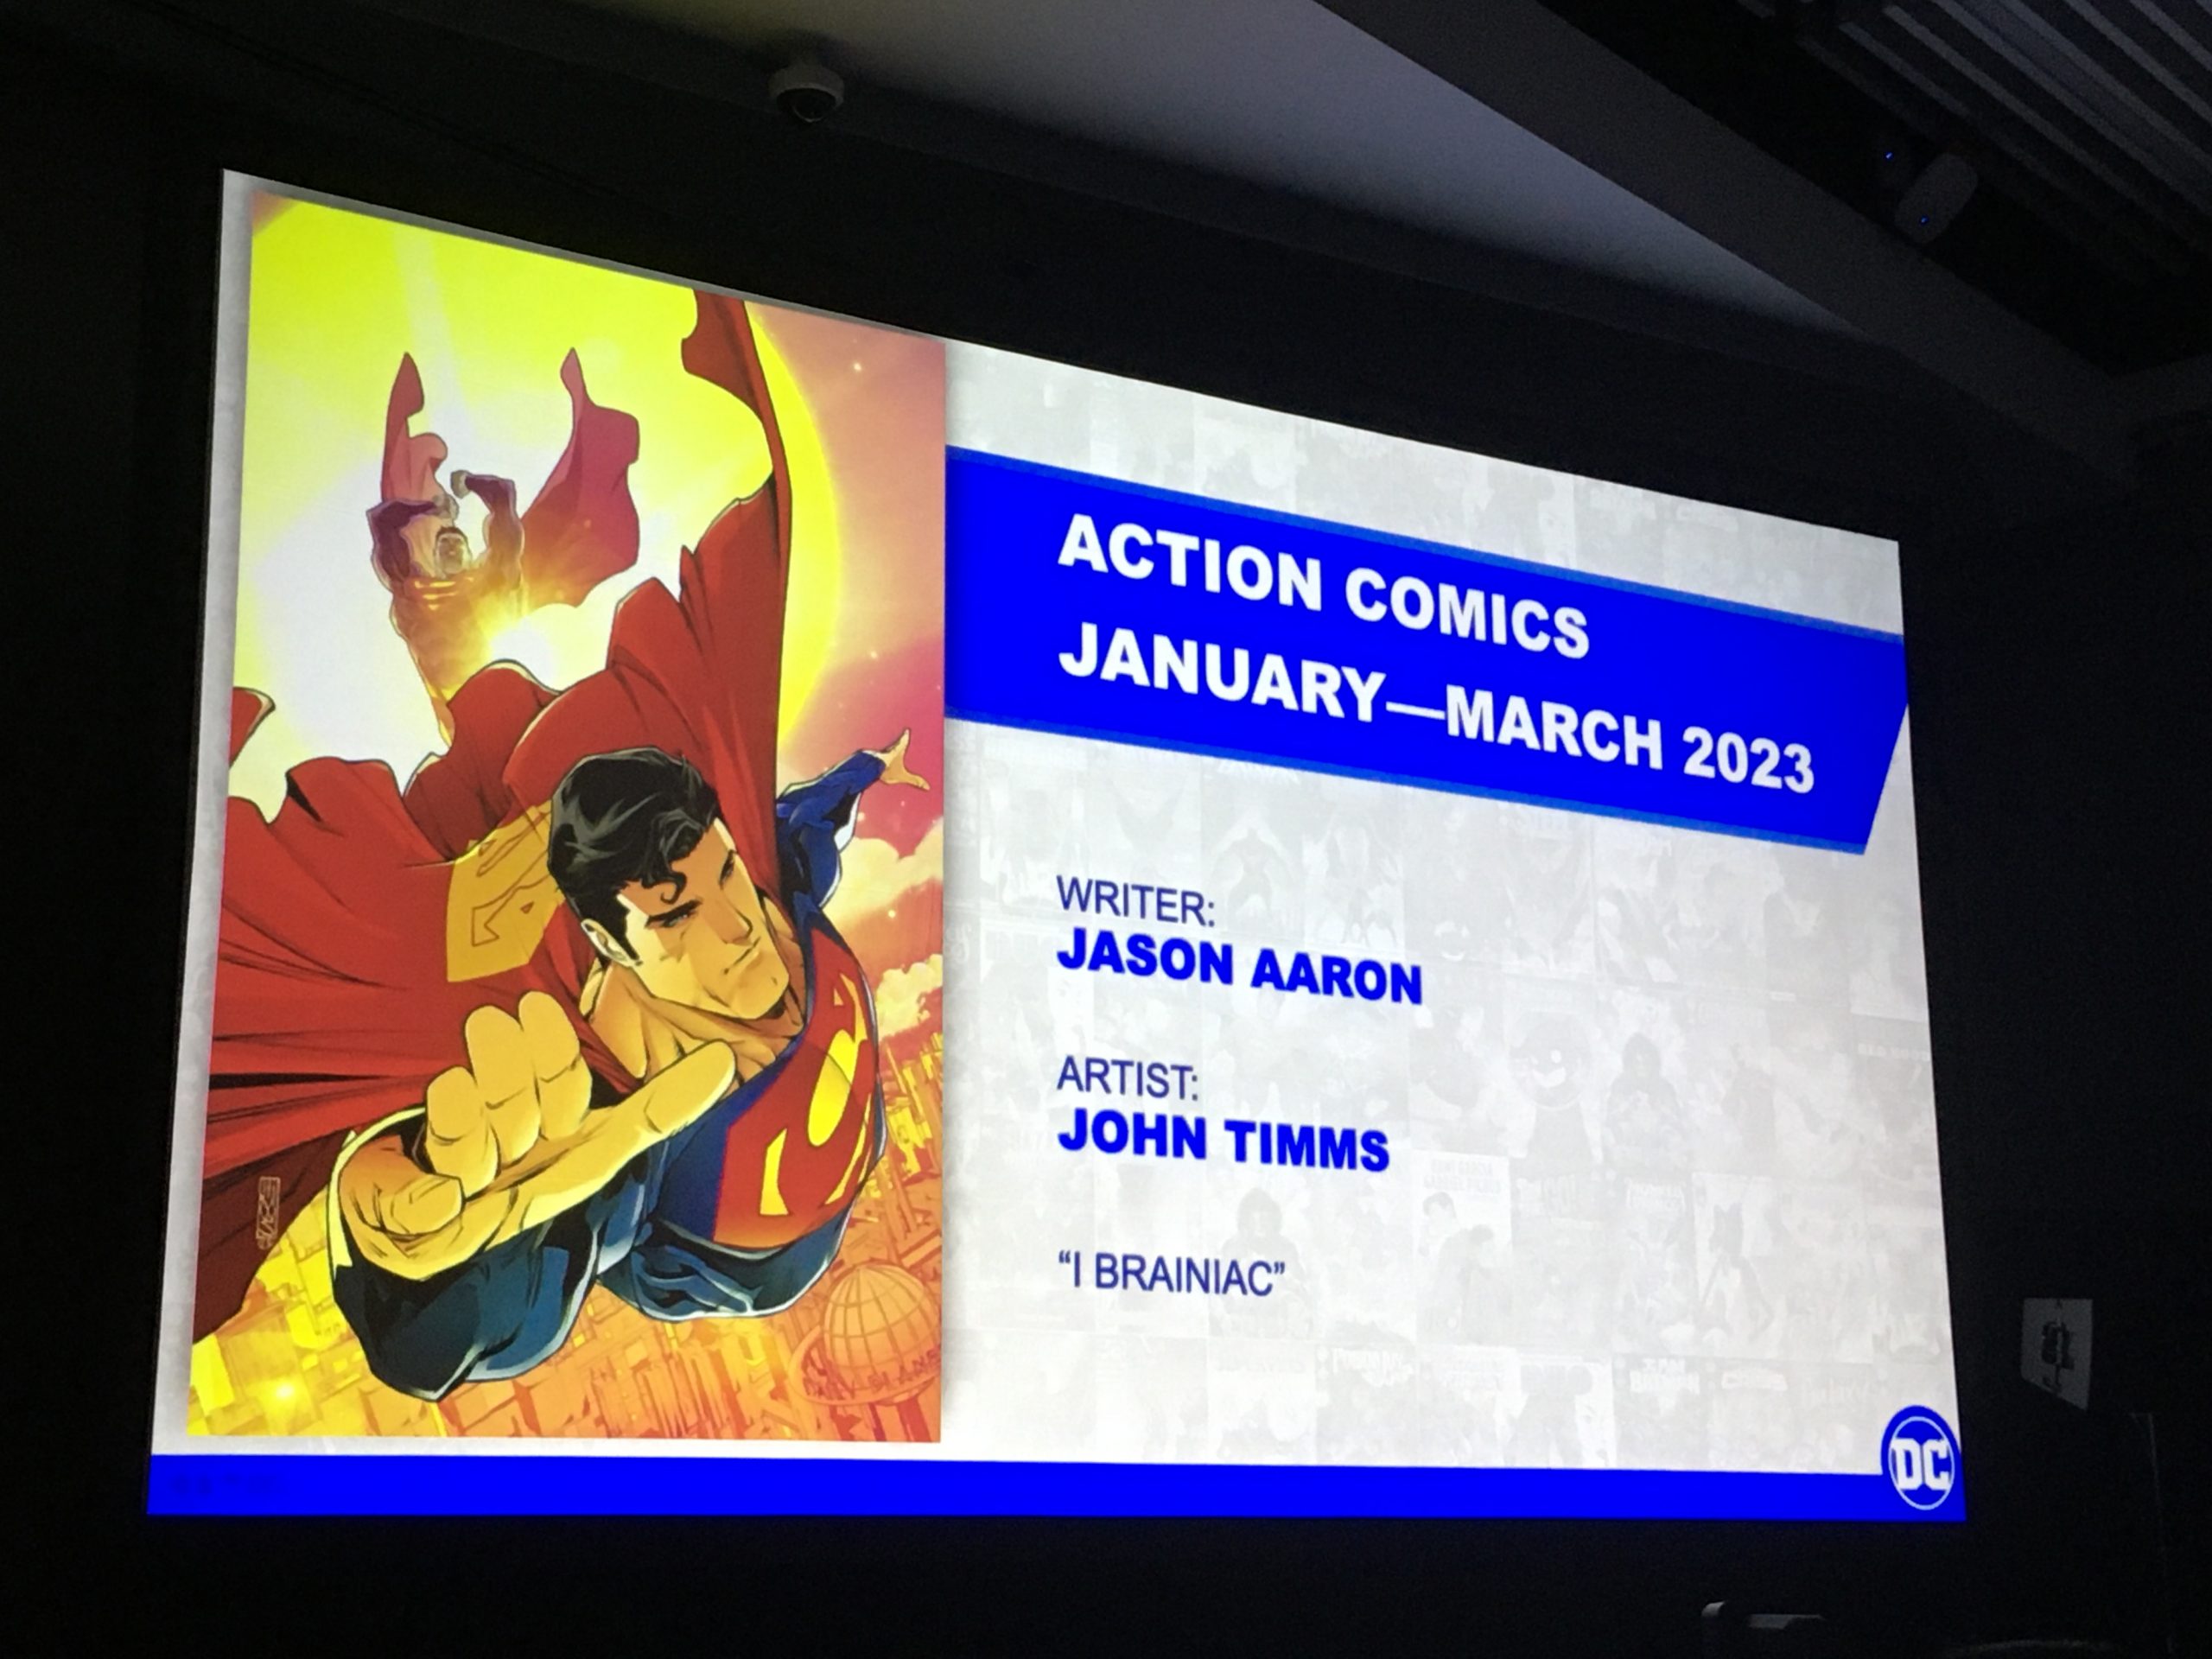 The I, Bizarro announcement from NYCC 2023